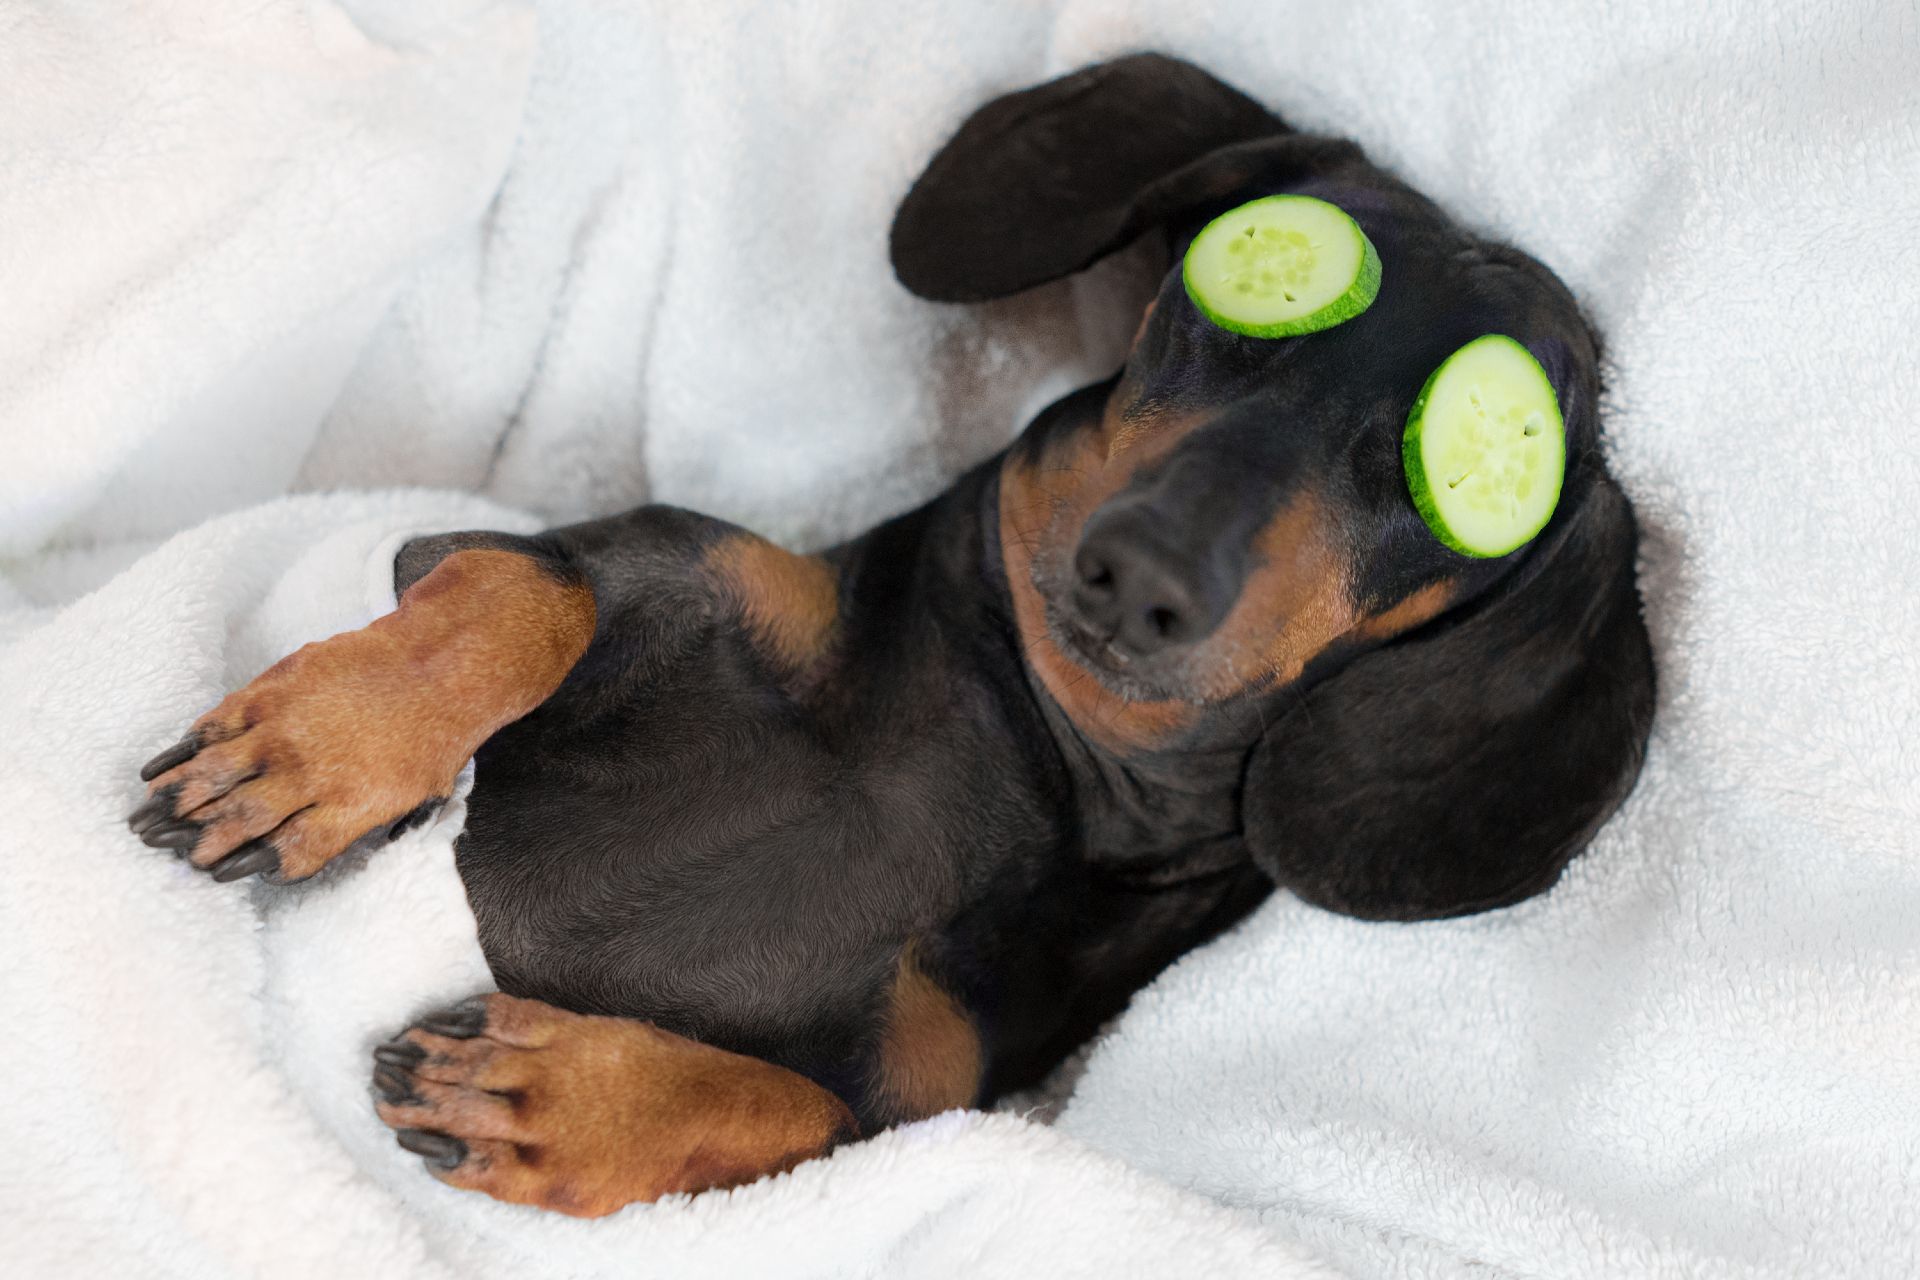 Sausage dog with cucumbers on its eyes